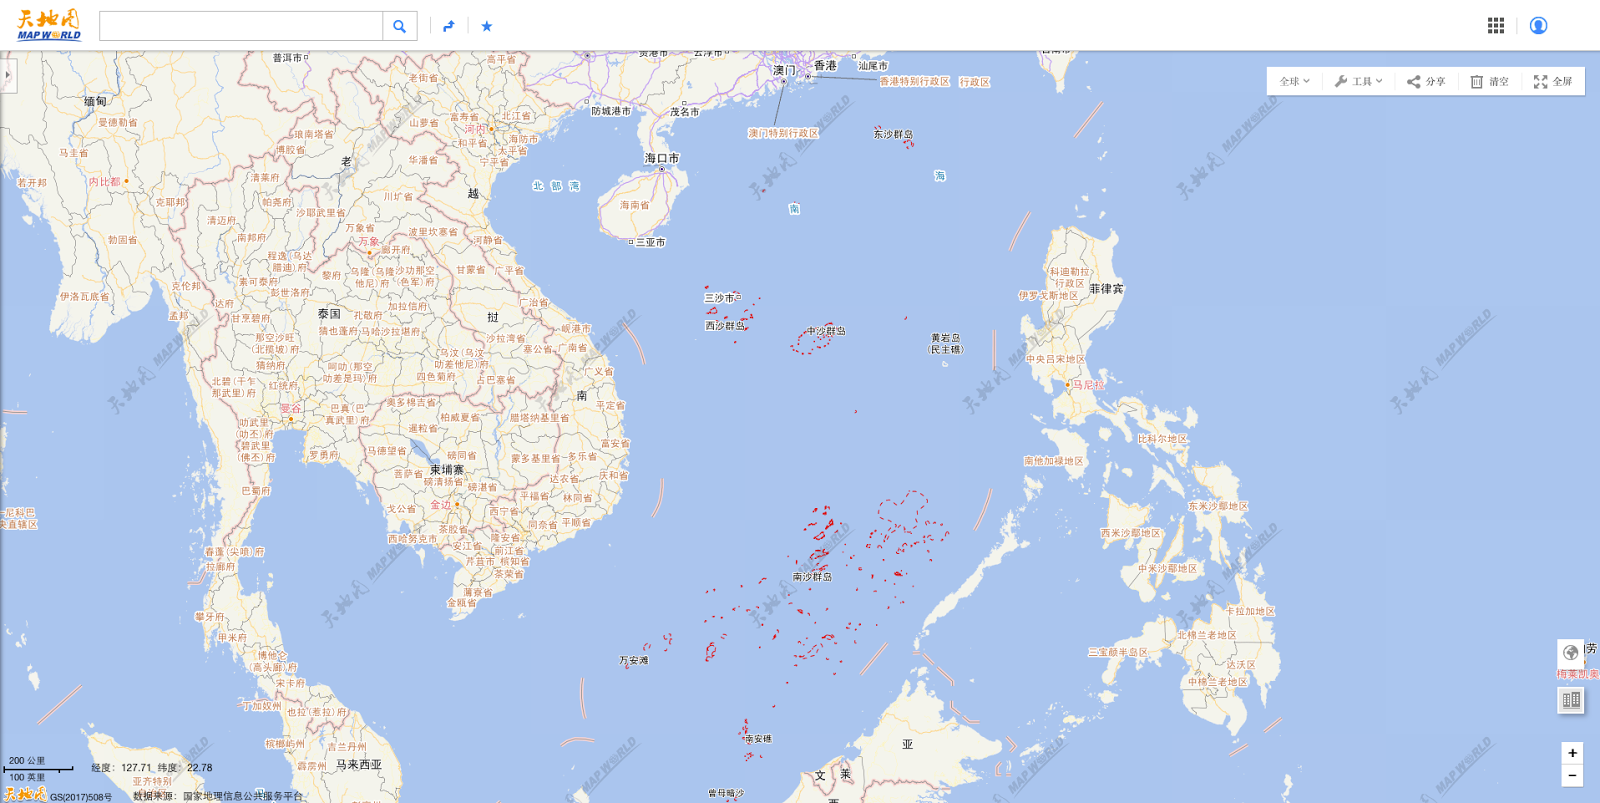 Geogarage Blog A Defiant Map Hunter Stakes Vietnam S Claims In The South China Sea